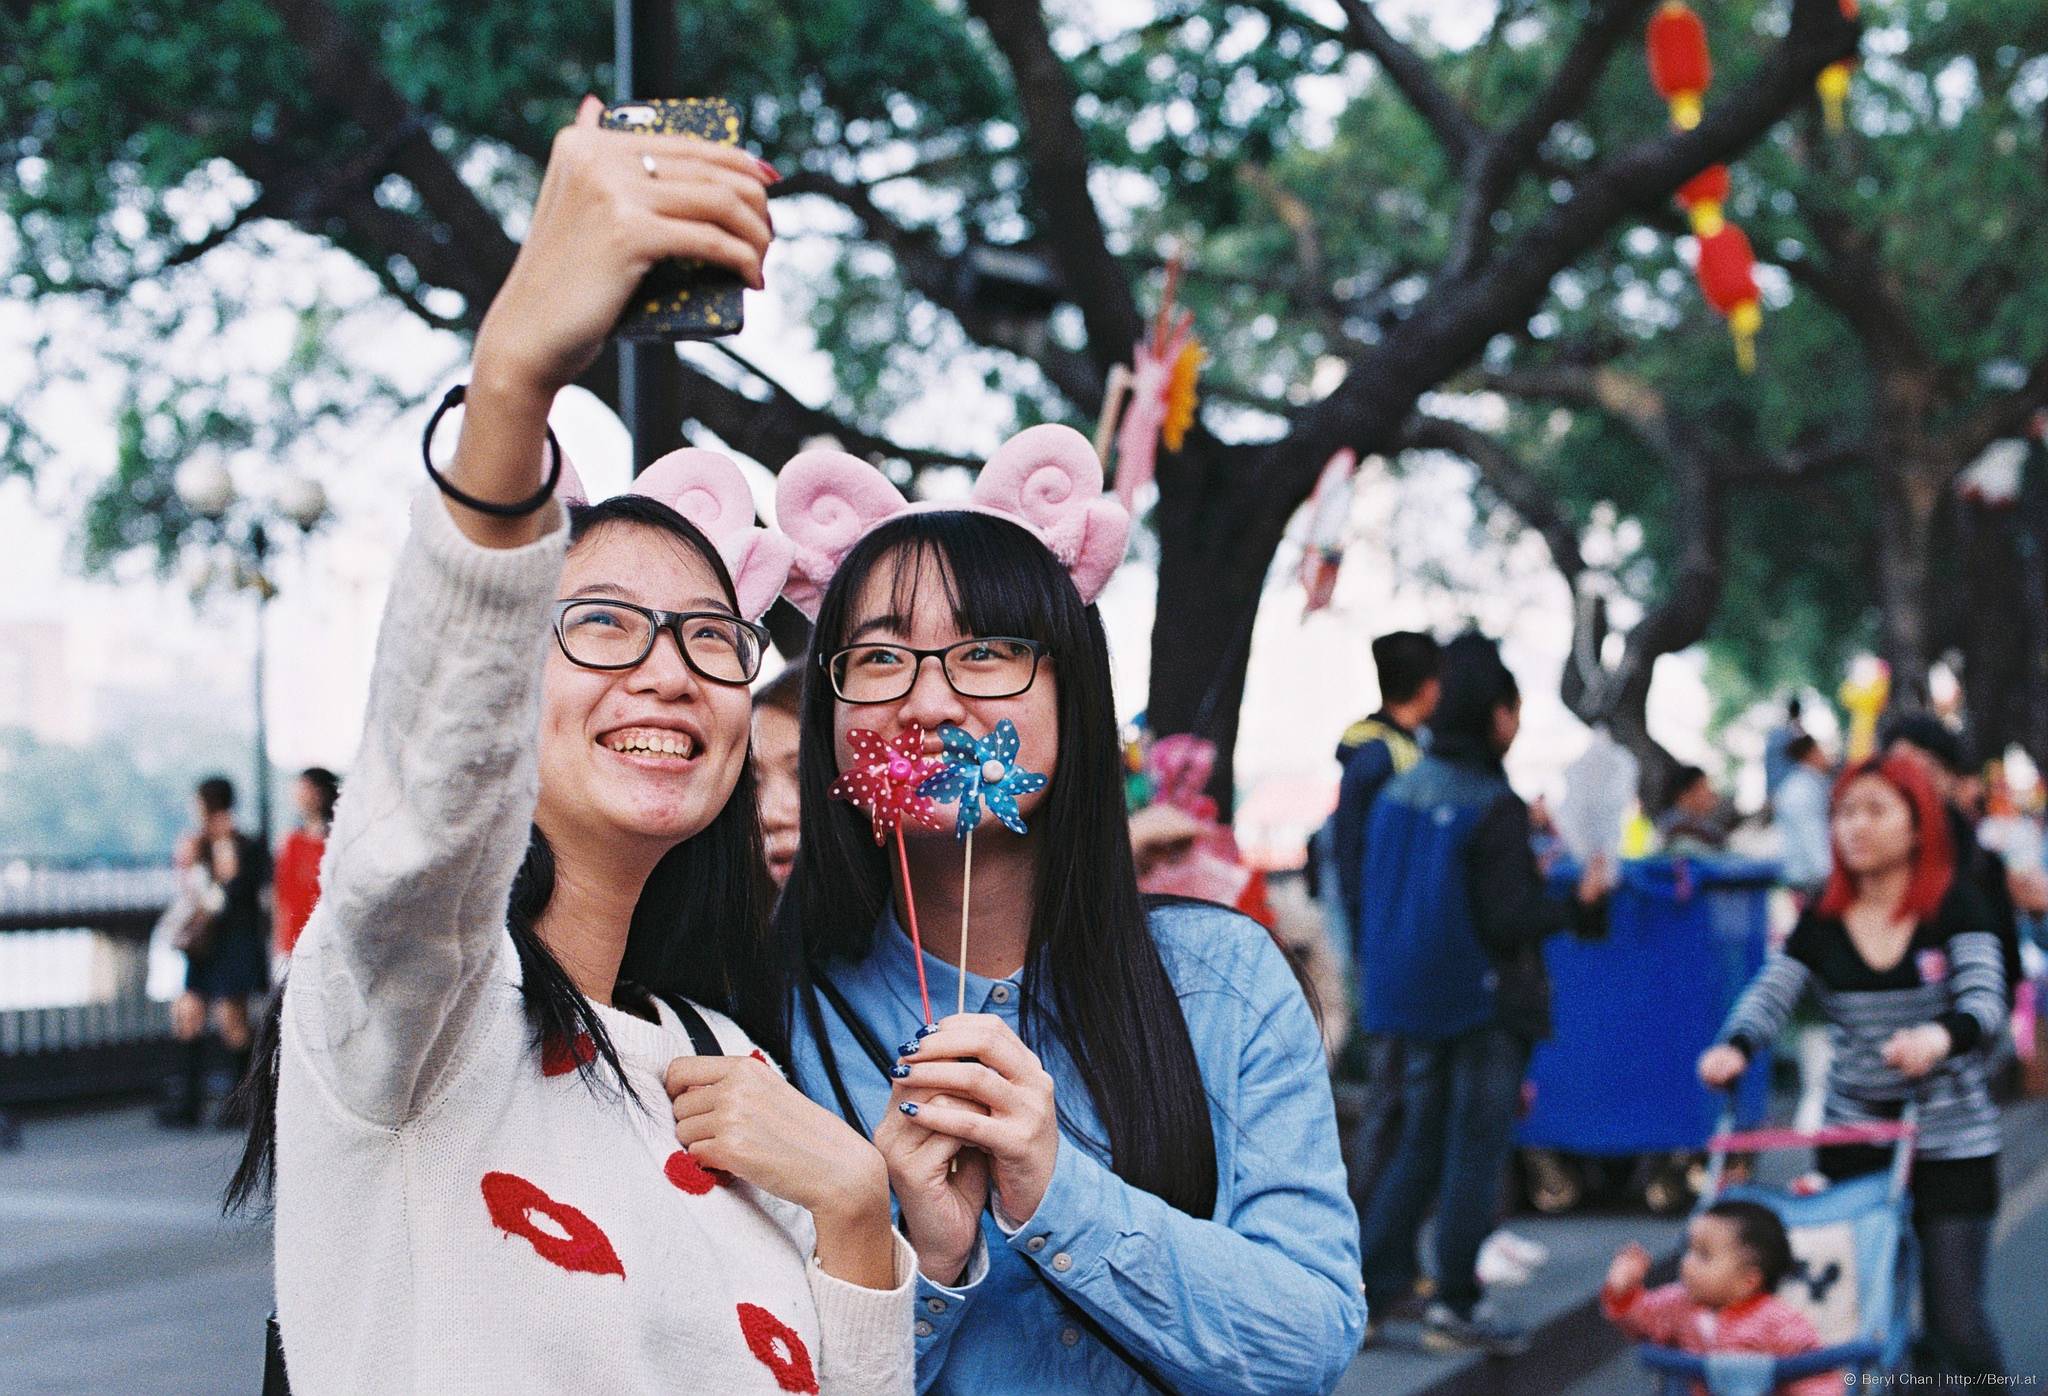 Chinese girls go crazy for the ultimate selfie camera